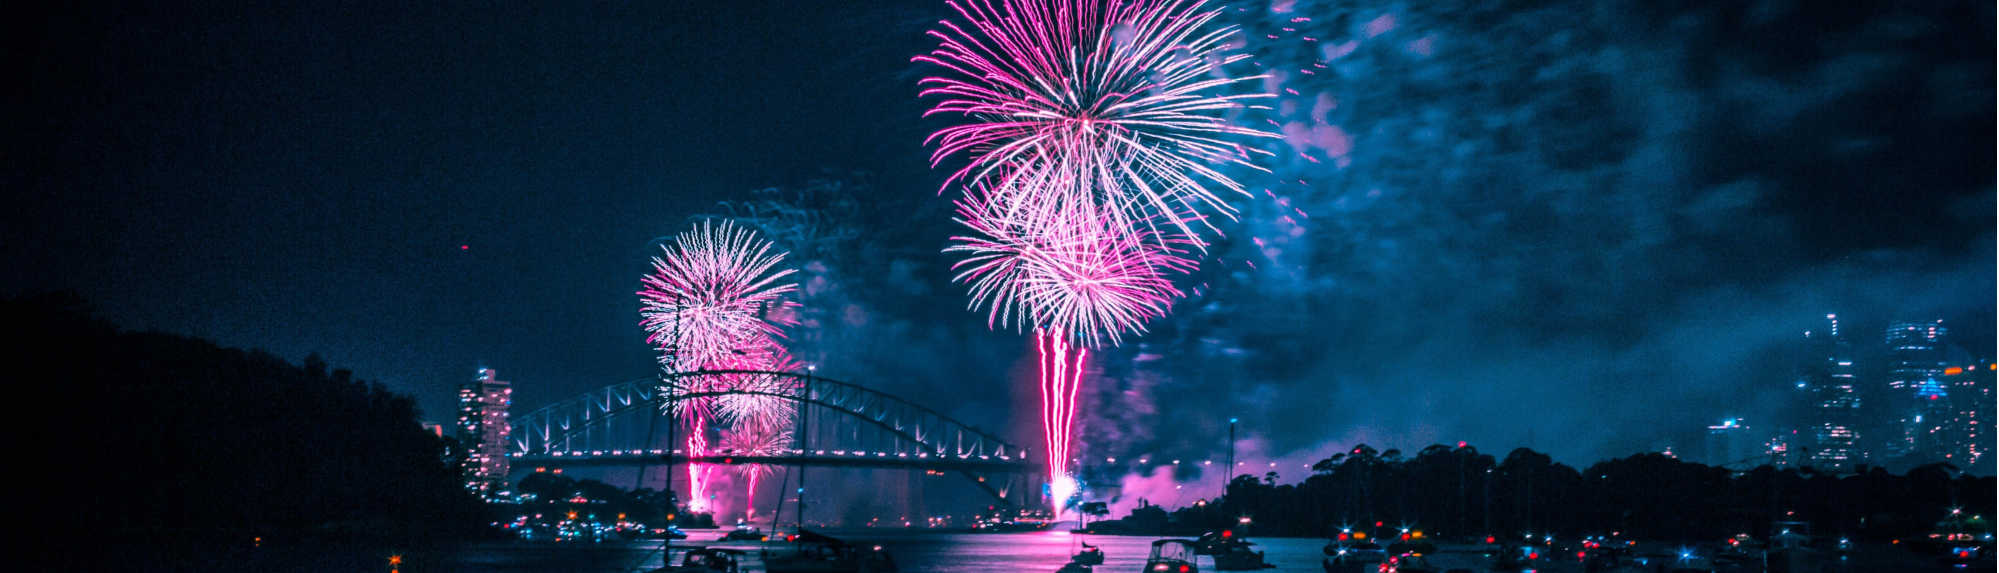 What to do on new year’s eve in Australia